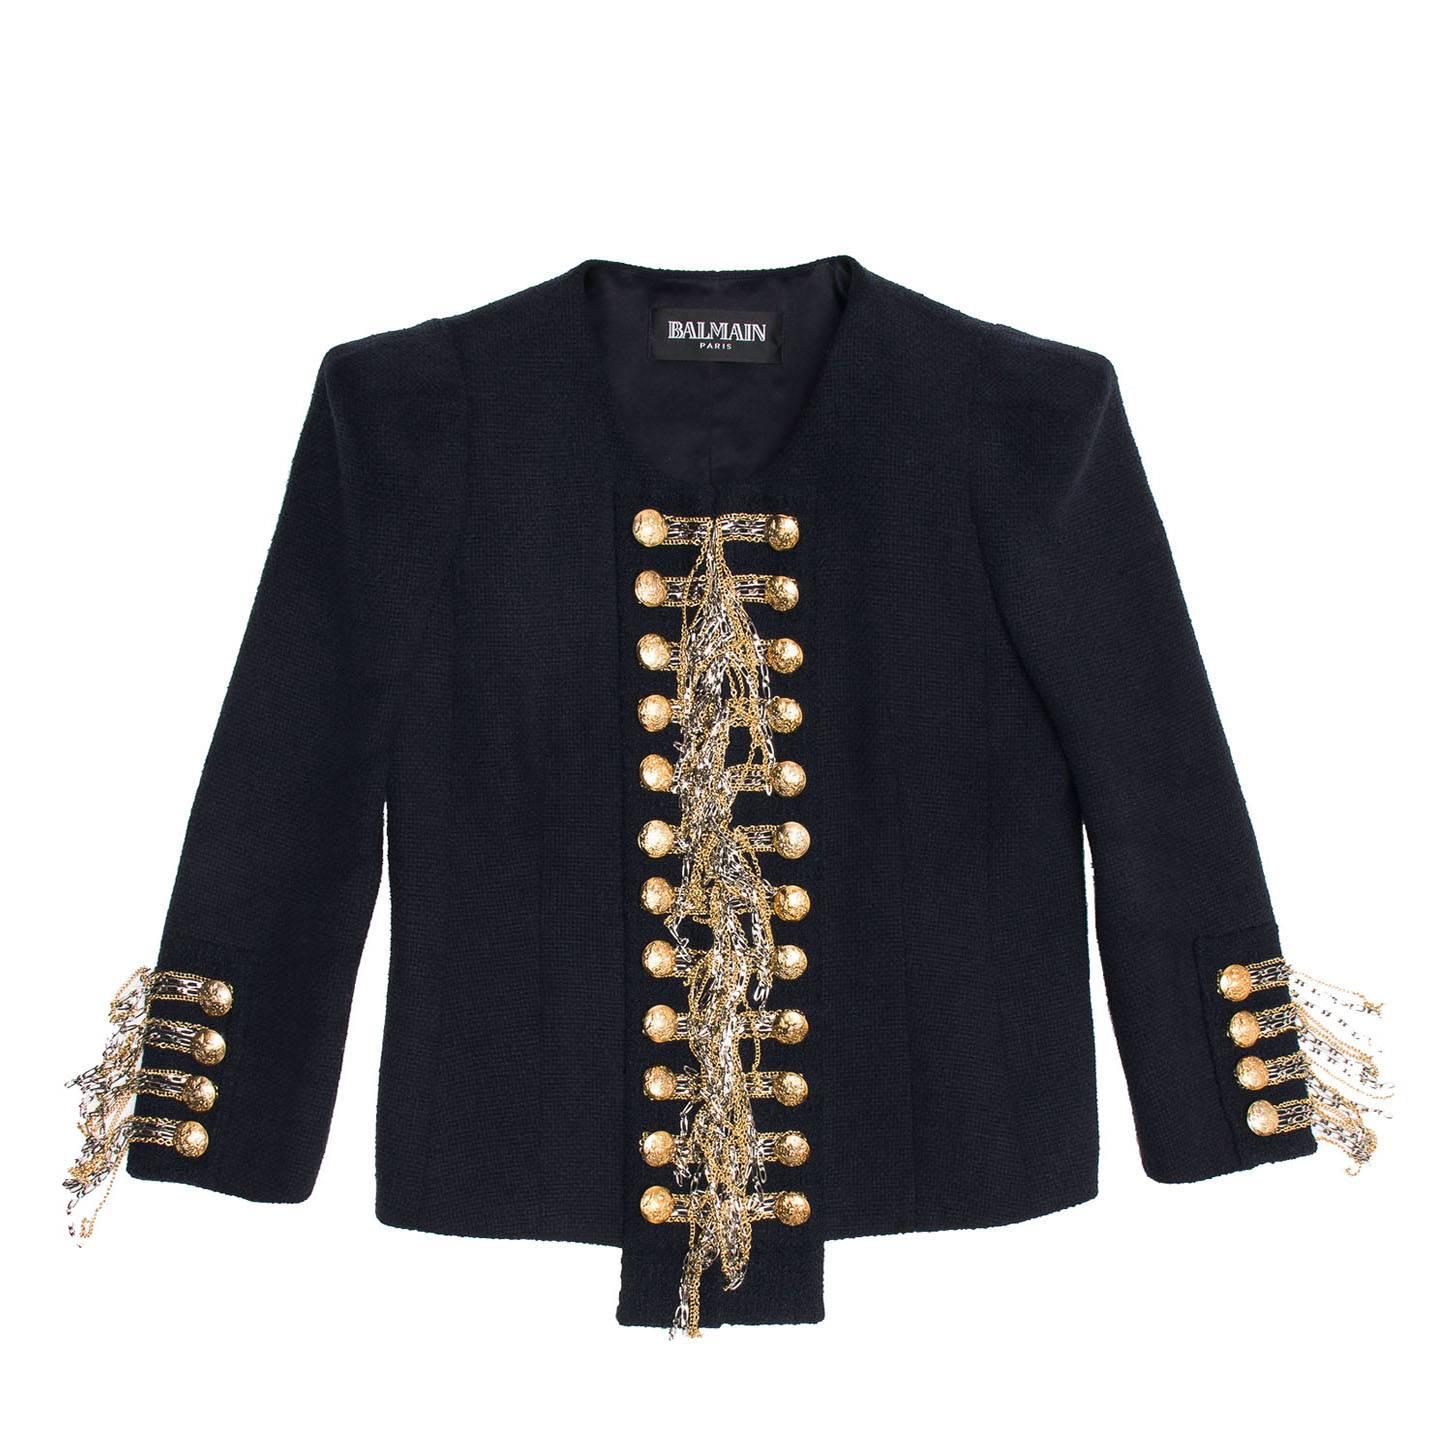 Blue silk & cotton woven cropped jacket with gold and silver chains to create a unique military style statement detail. The neckline is round and elegant and the jacket fastens with invisible hooks at center front where the dangling chains meet